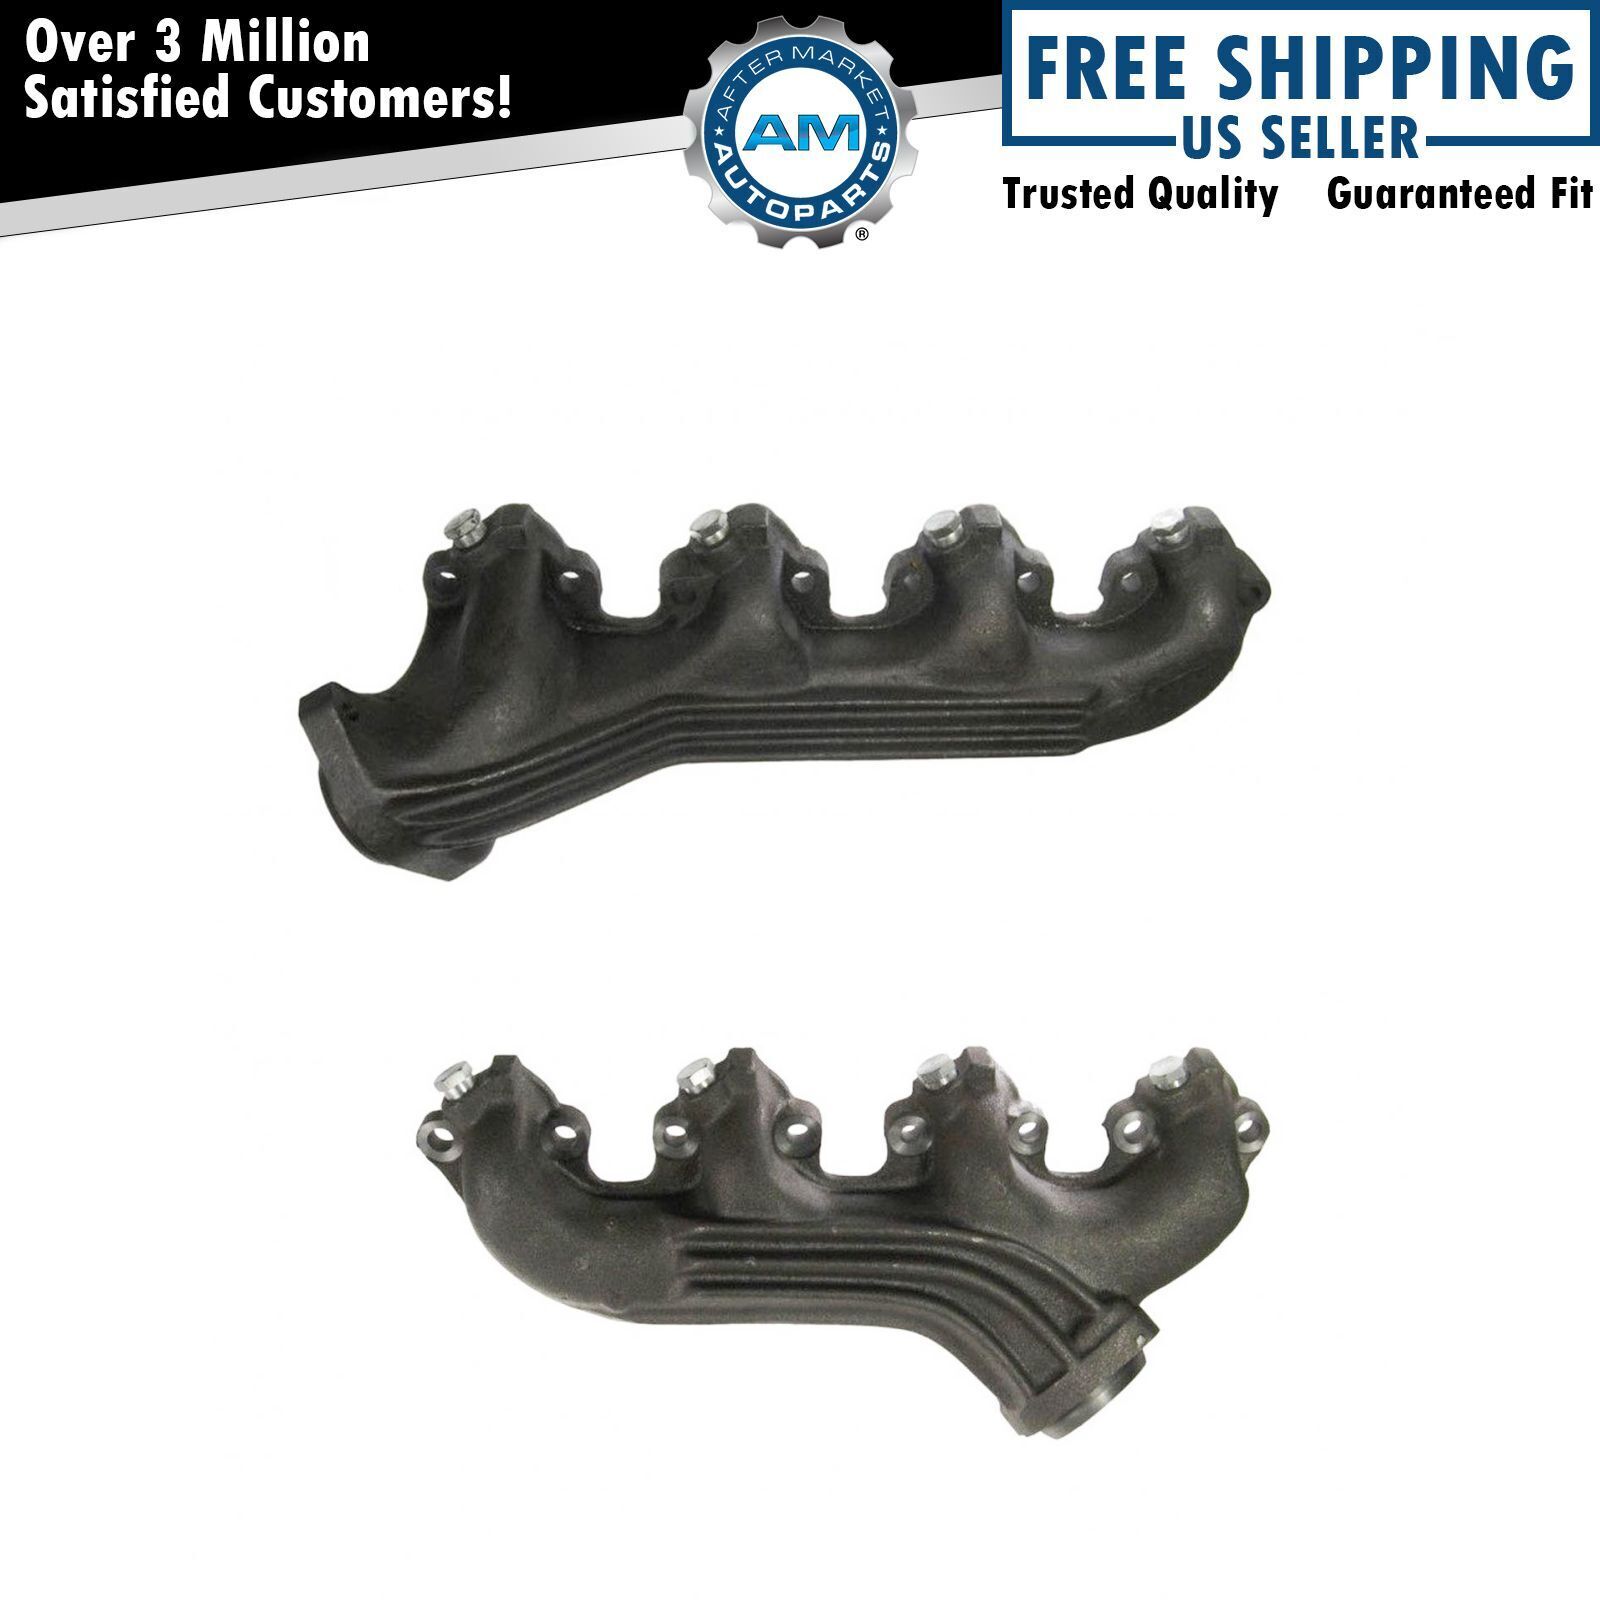 Exhaust Manifolds Pair Set for 80-87 Ford F-Series Pickup Truck E-Series 7.5L V8